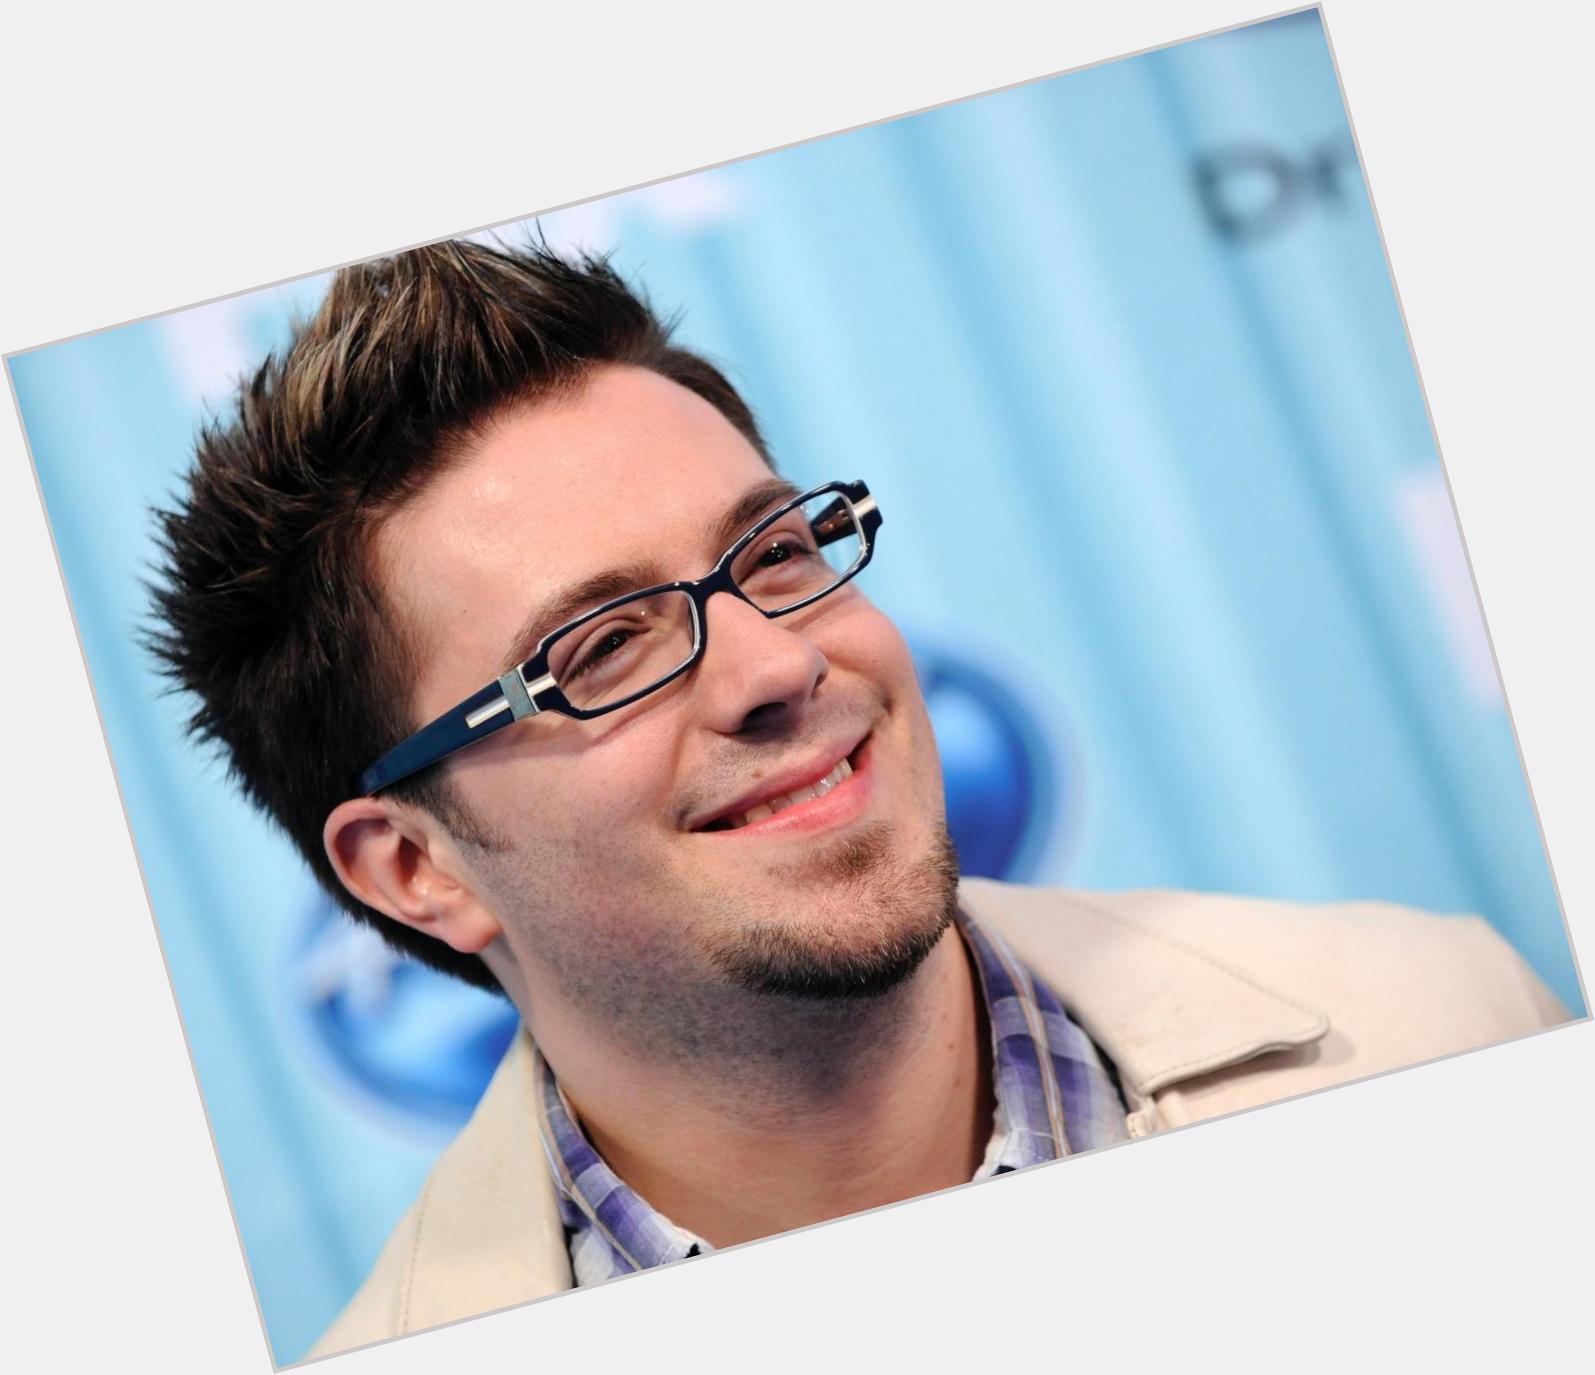 <a href="/hot-men/danny-gokey/is-he-married-christian-hollywood-undead-dating-anyone">Danny Gokey</a> Average body,  dark brown hair & hairstyles